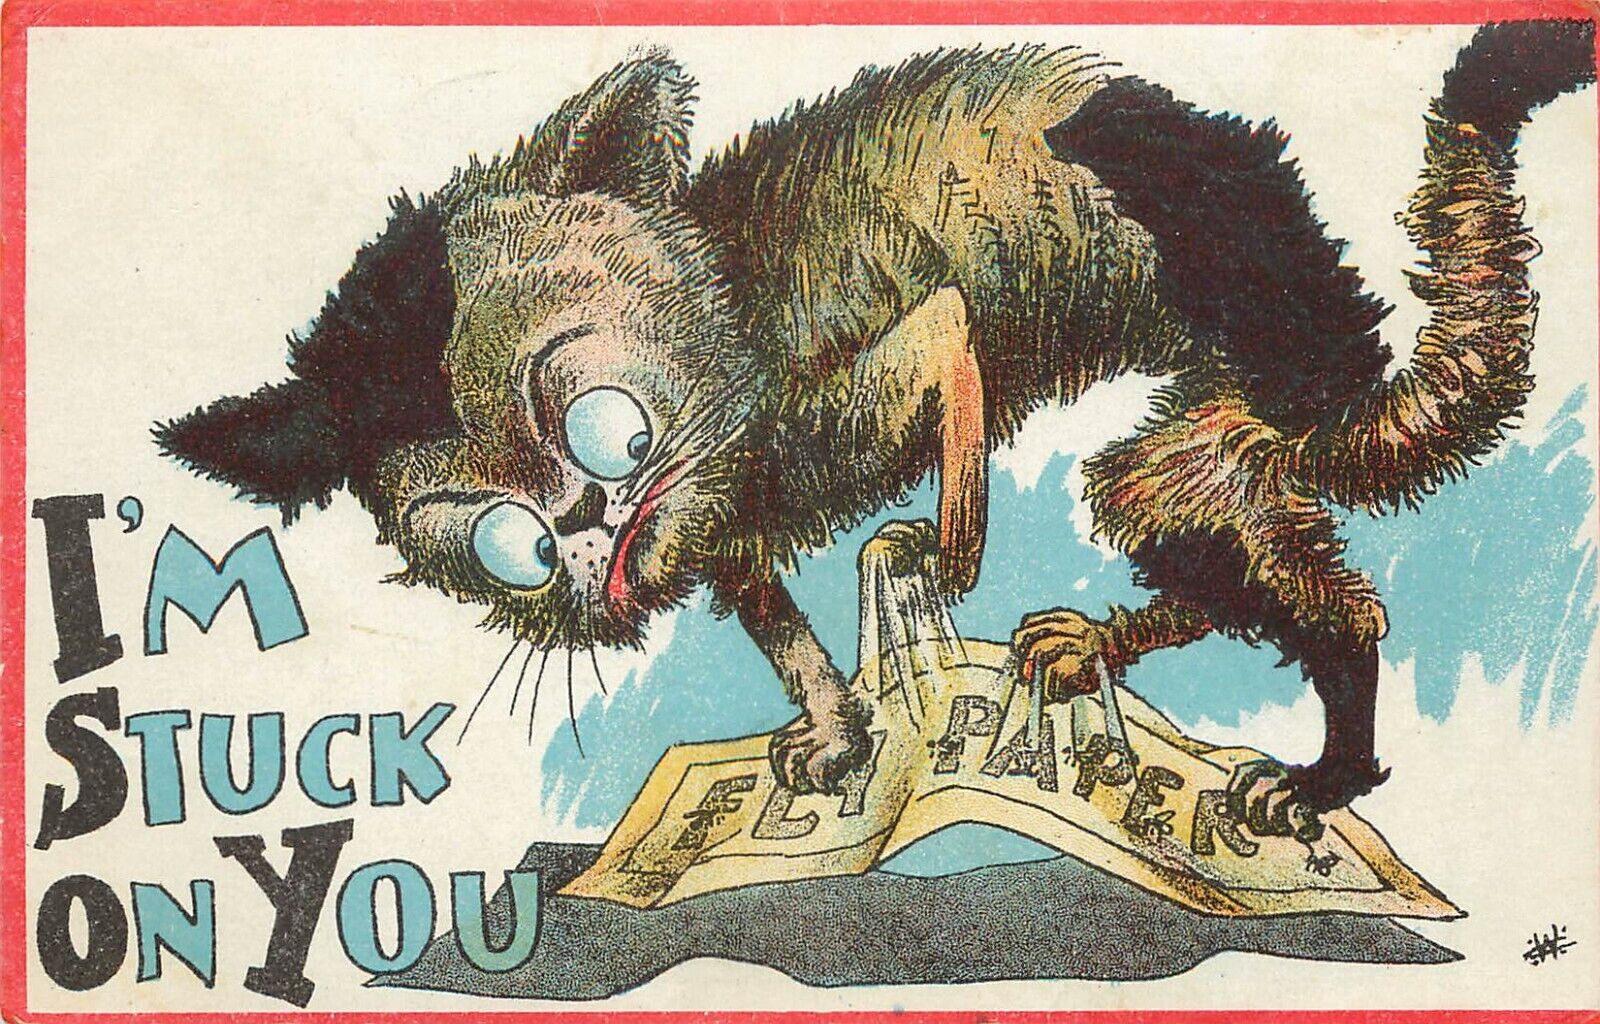 Ugly Cat Stuck on Fly Paper Postcard 99 I'm Stuck on You